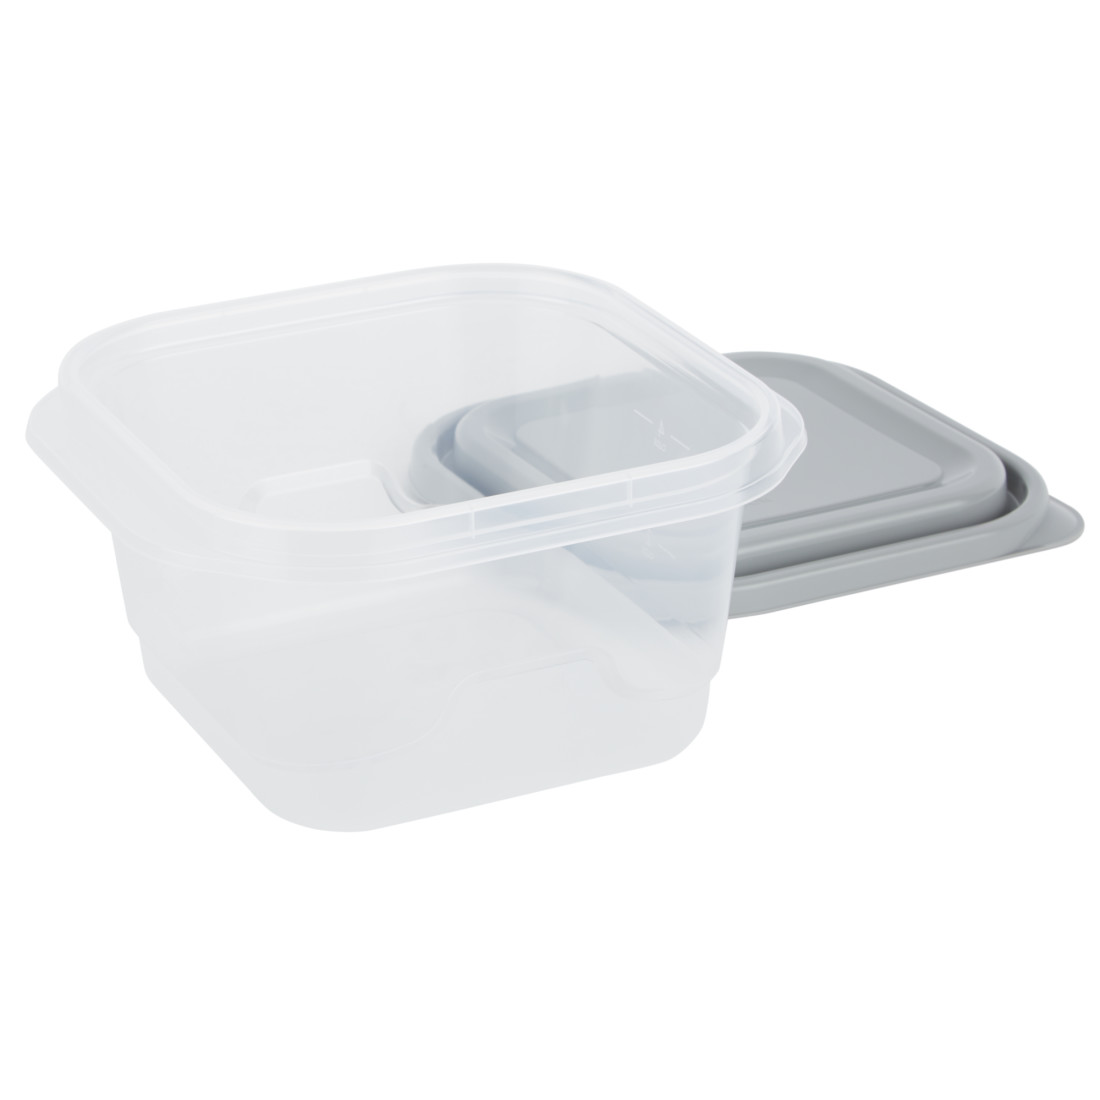 GoodCook Everyware Round Food Storage Containers Extra Large (2 ct)